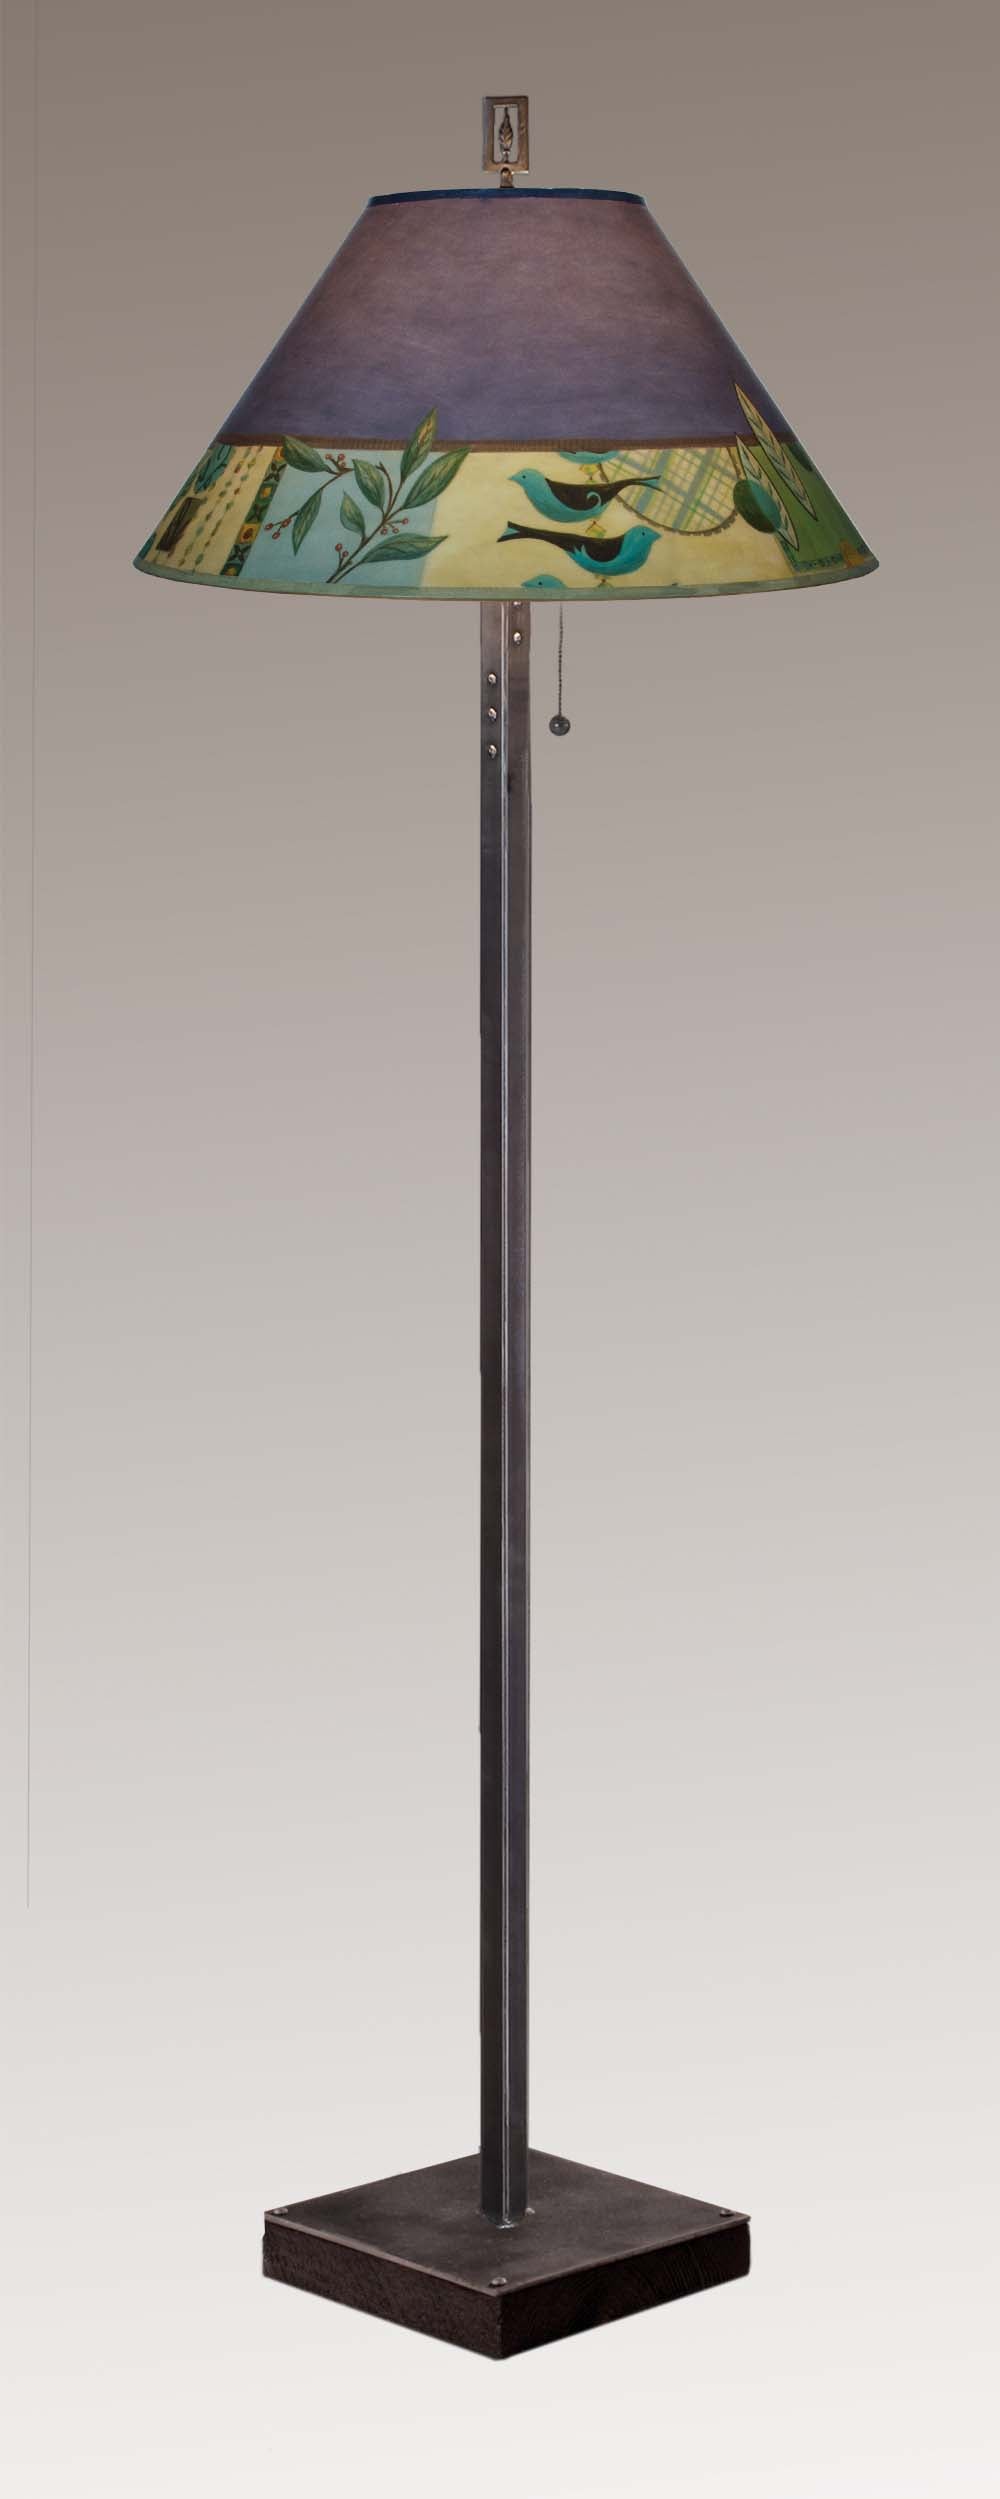 Janna Ugone & Co Floor Lamps Steel Floor Lamp on  Reclaimed Wood with Large Conical Shade in New Capri Periwinkle